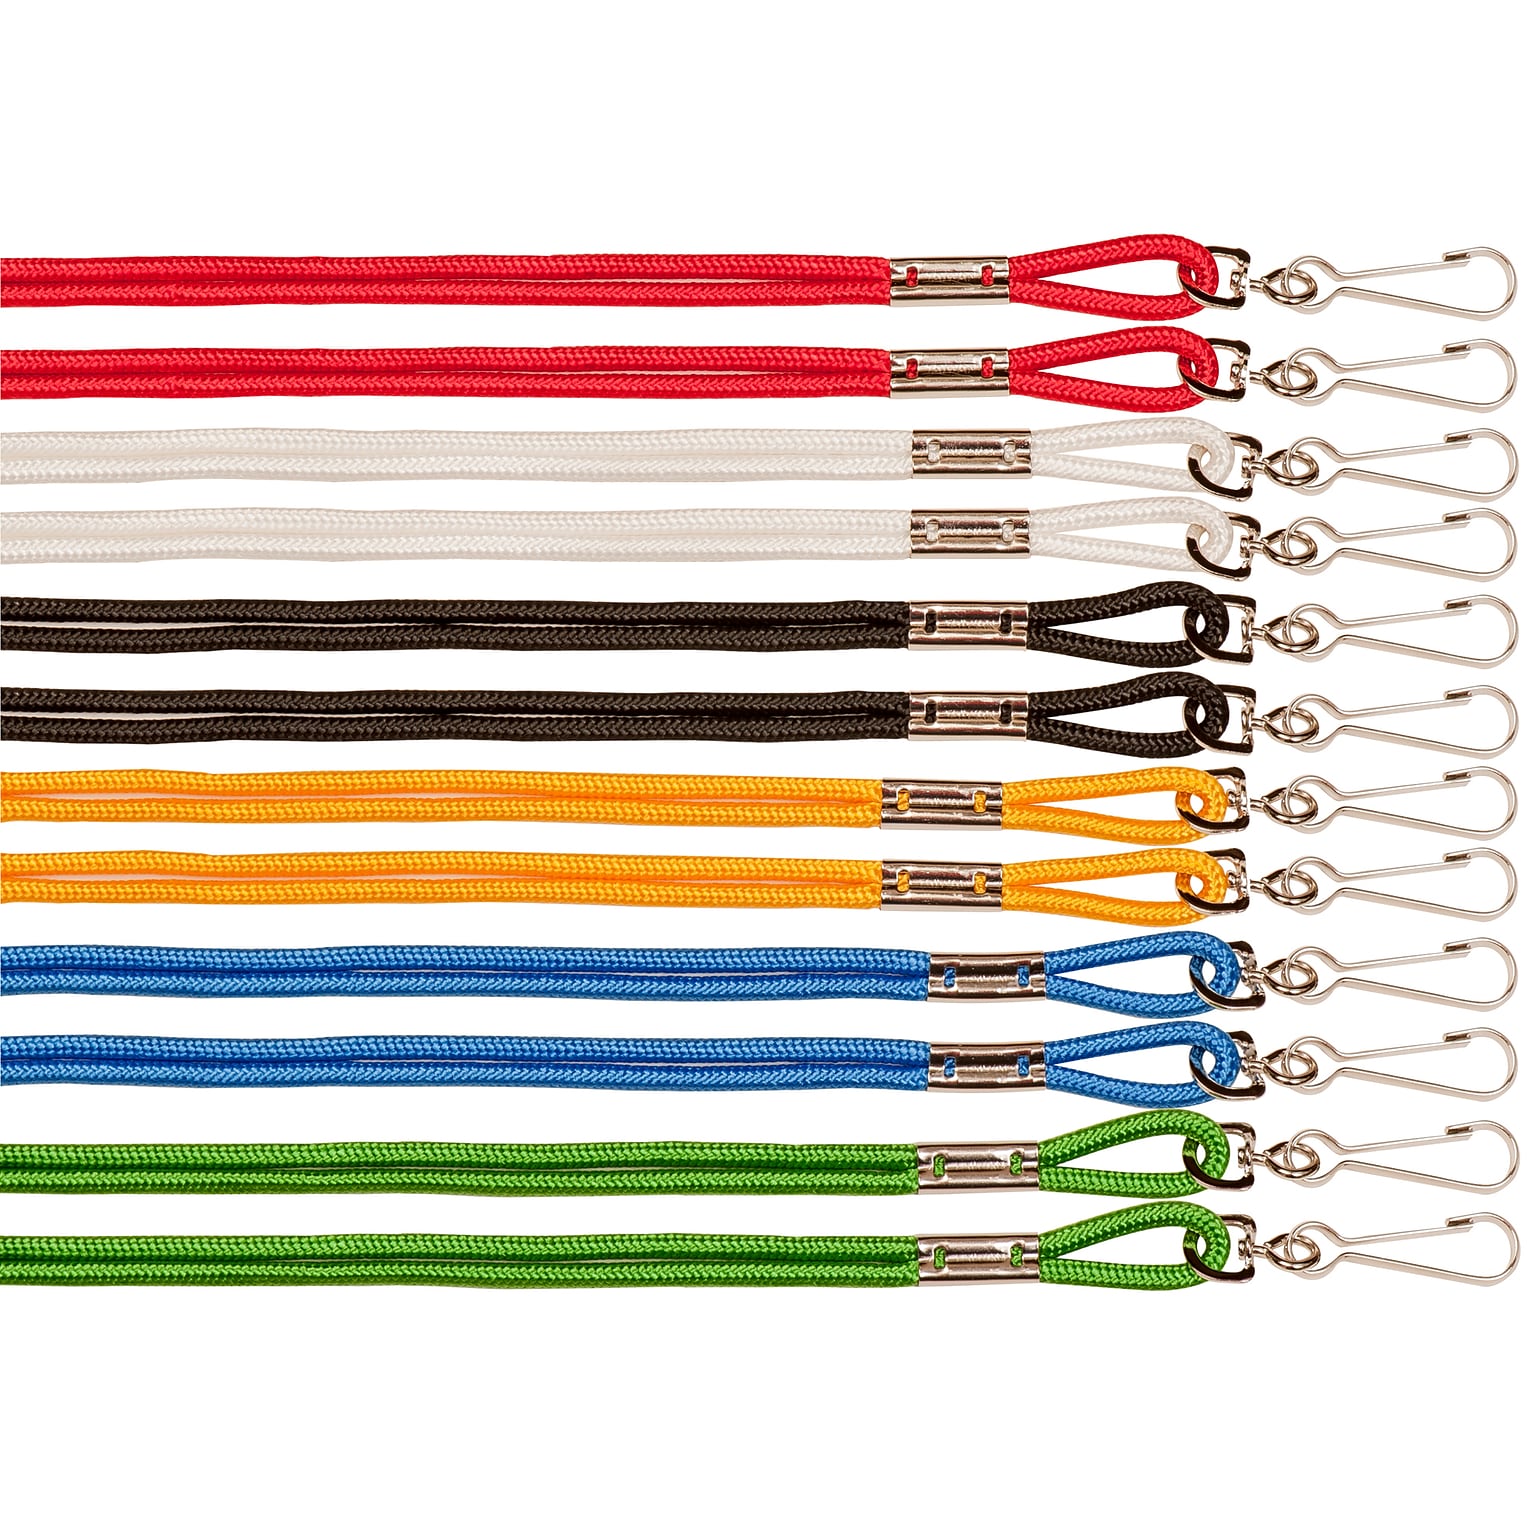 Champion Sports Lanyards, Assorted Colors, 12/Pack (CHS126ASST)